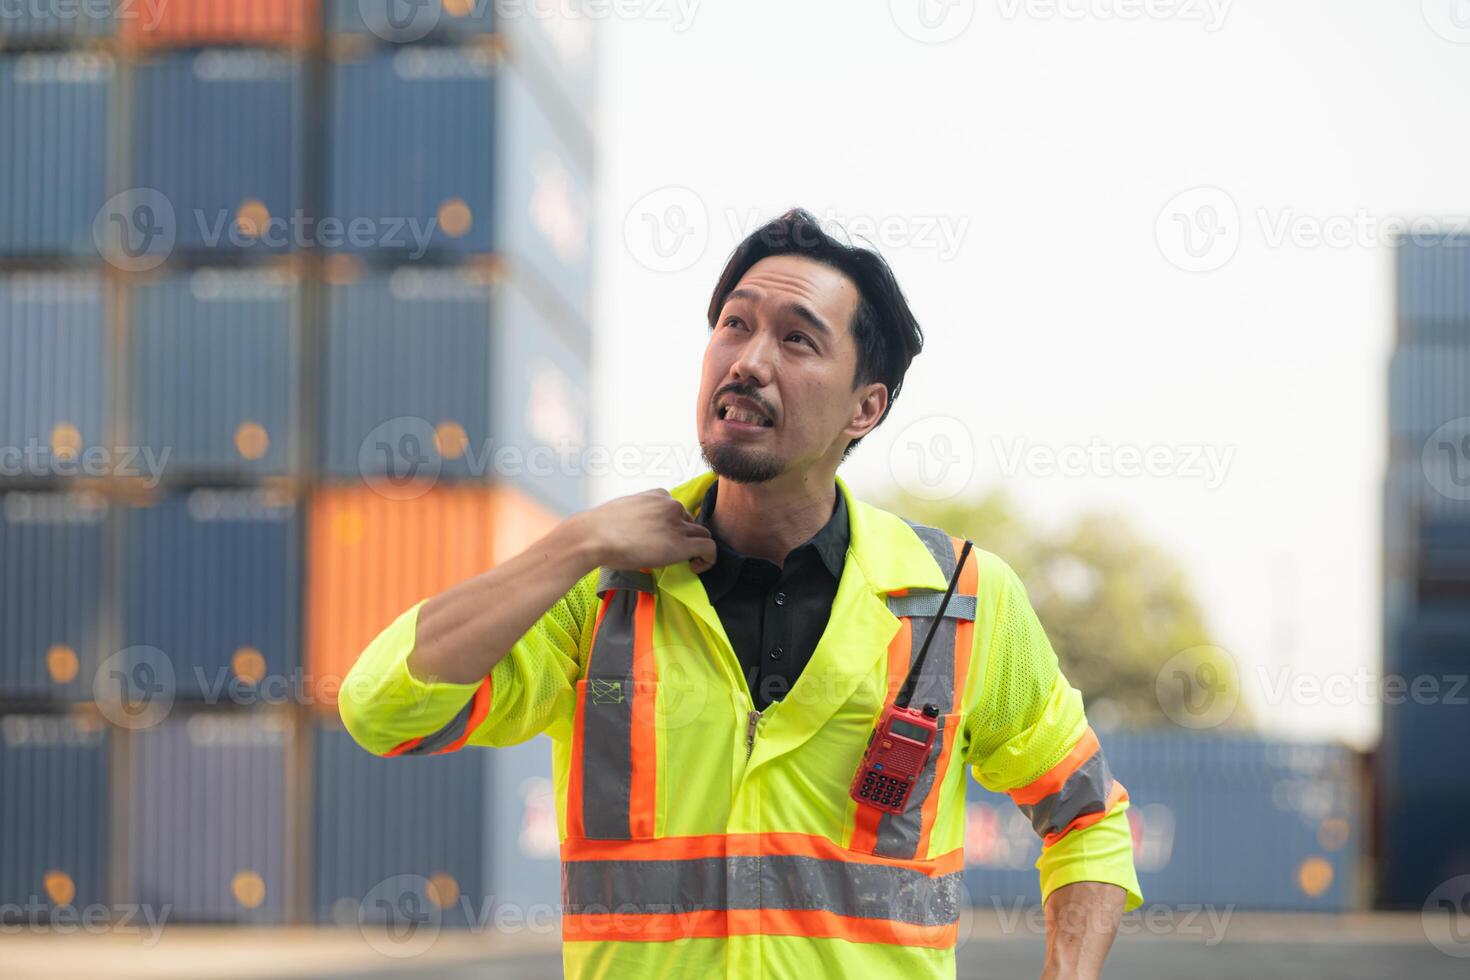 Portrait of an Asian male worker wearing a safety vest and hard hat, taking a break from work with a container box in the background photo